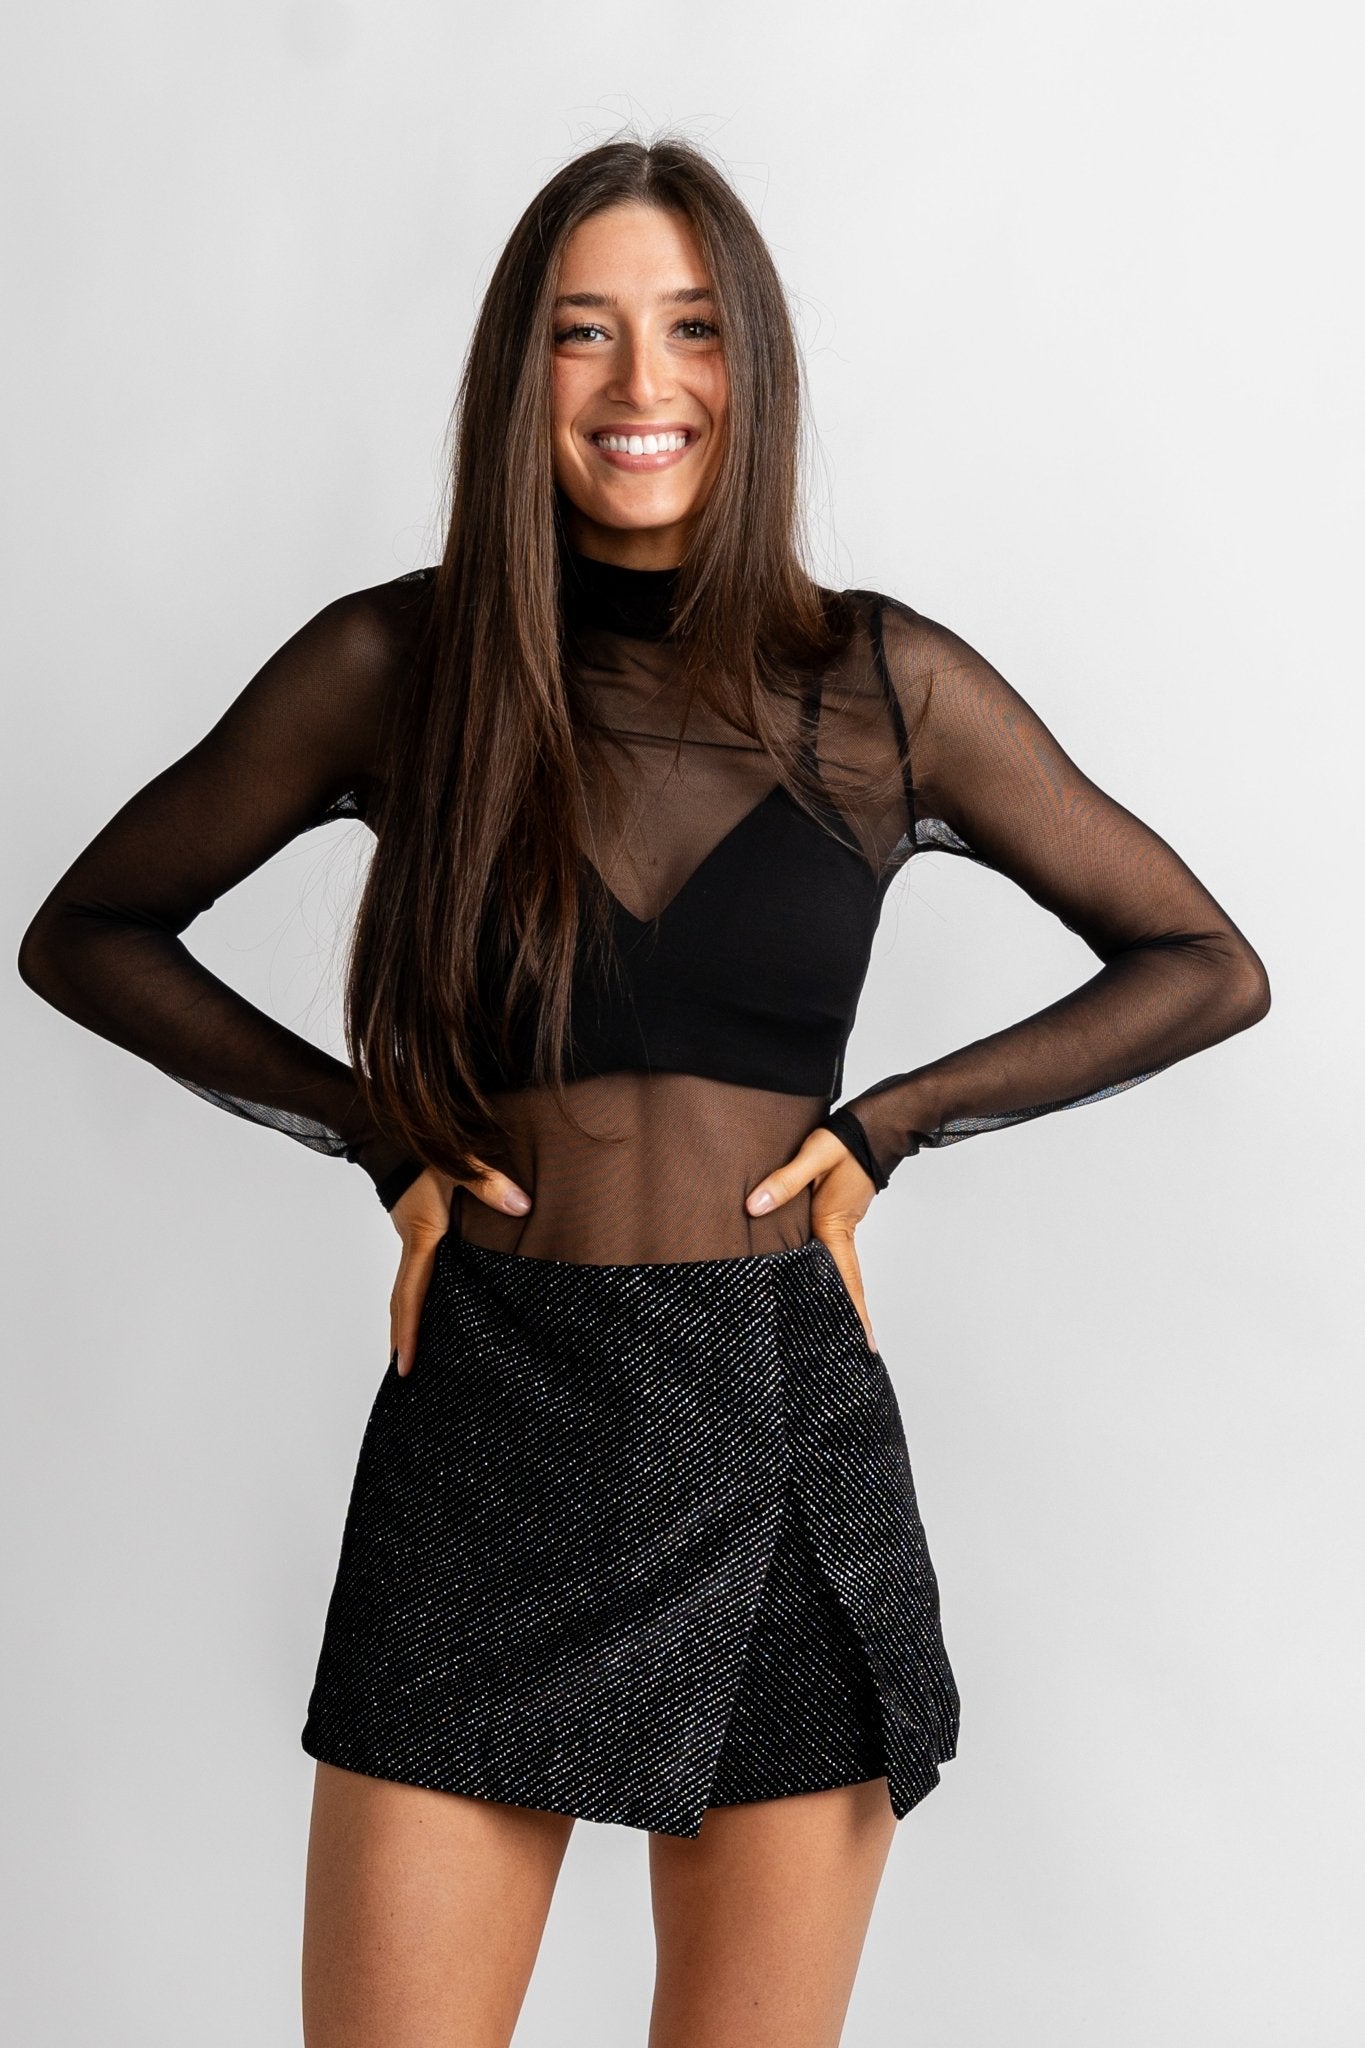 Velvet glitter front slit skort black - Affordable New Year's Eve Party Outfits at Lush Fashion Lounge Boutique in Oklahoma City